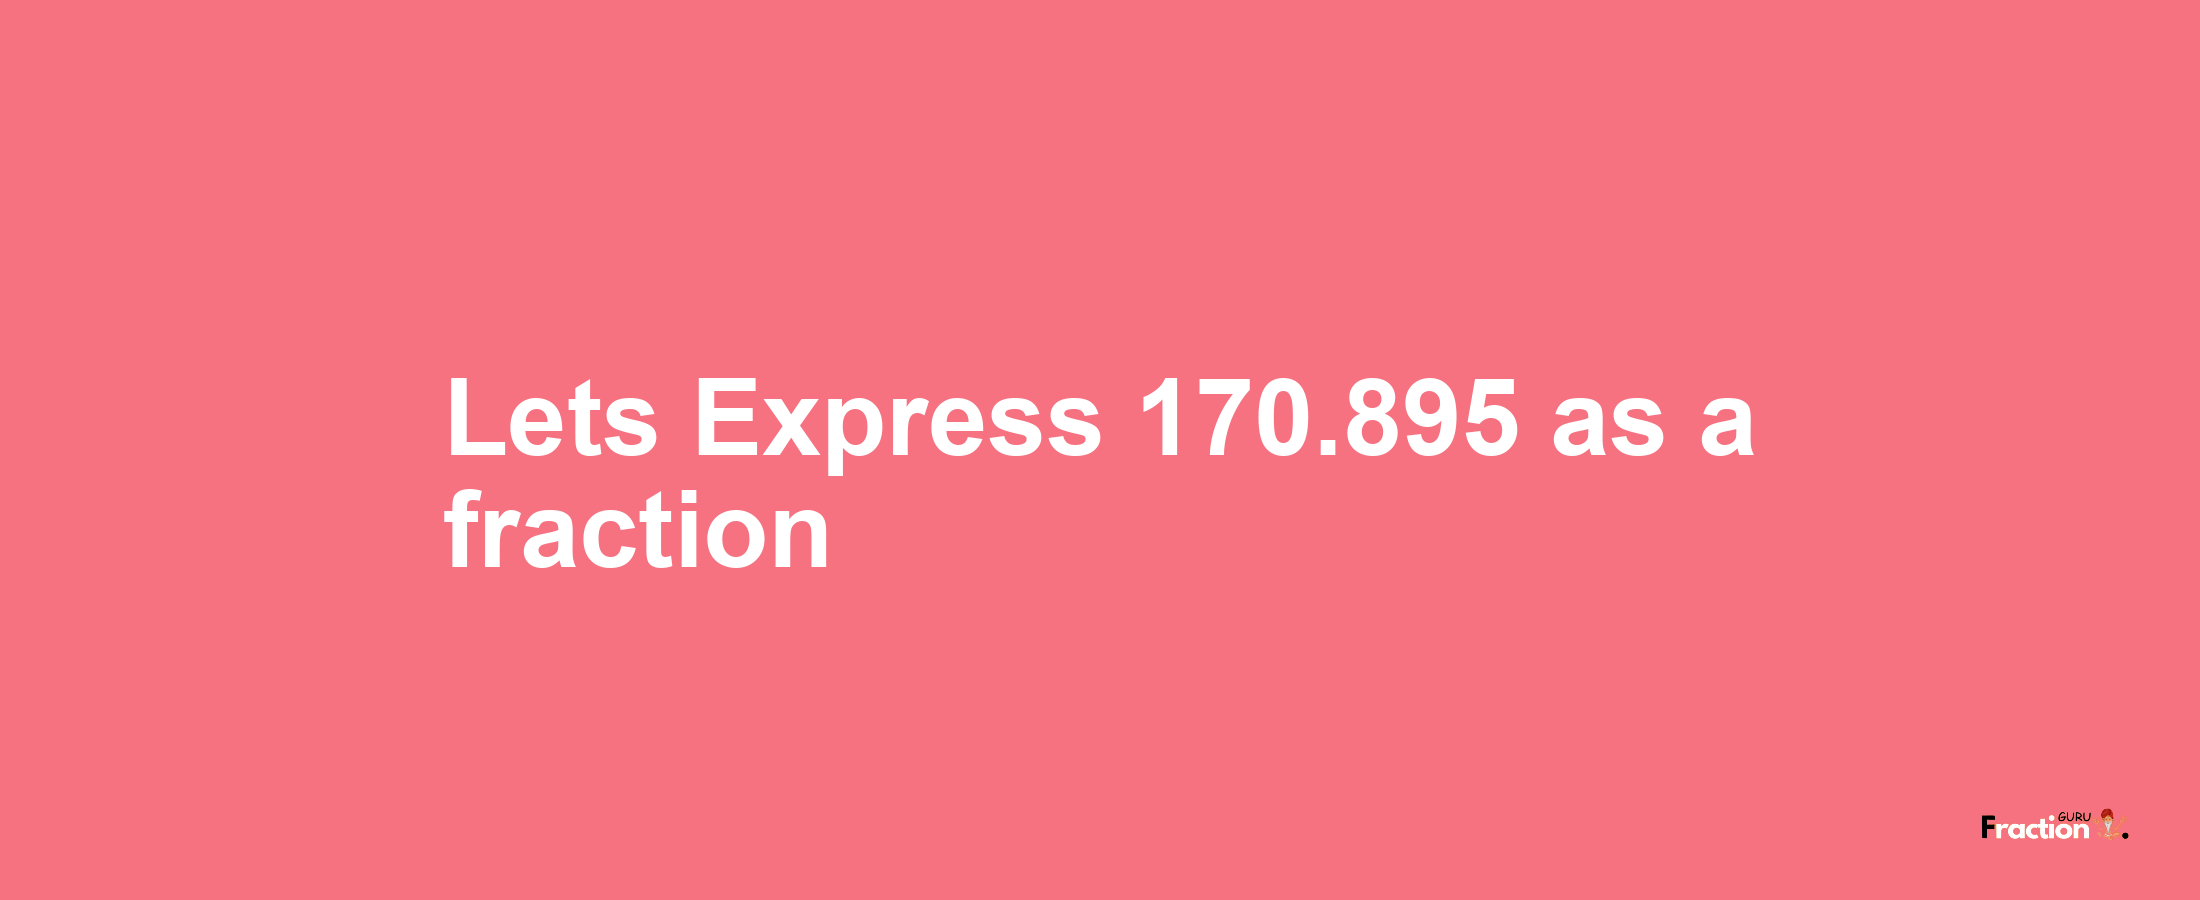 Lets Express 170.895 as afraction